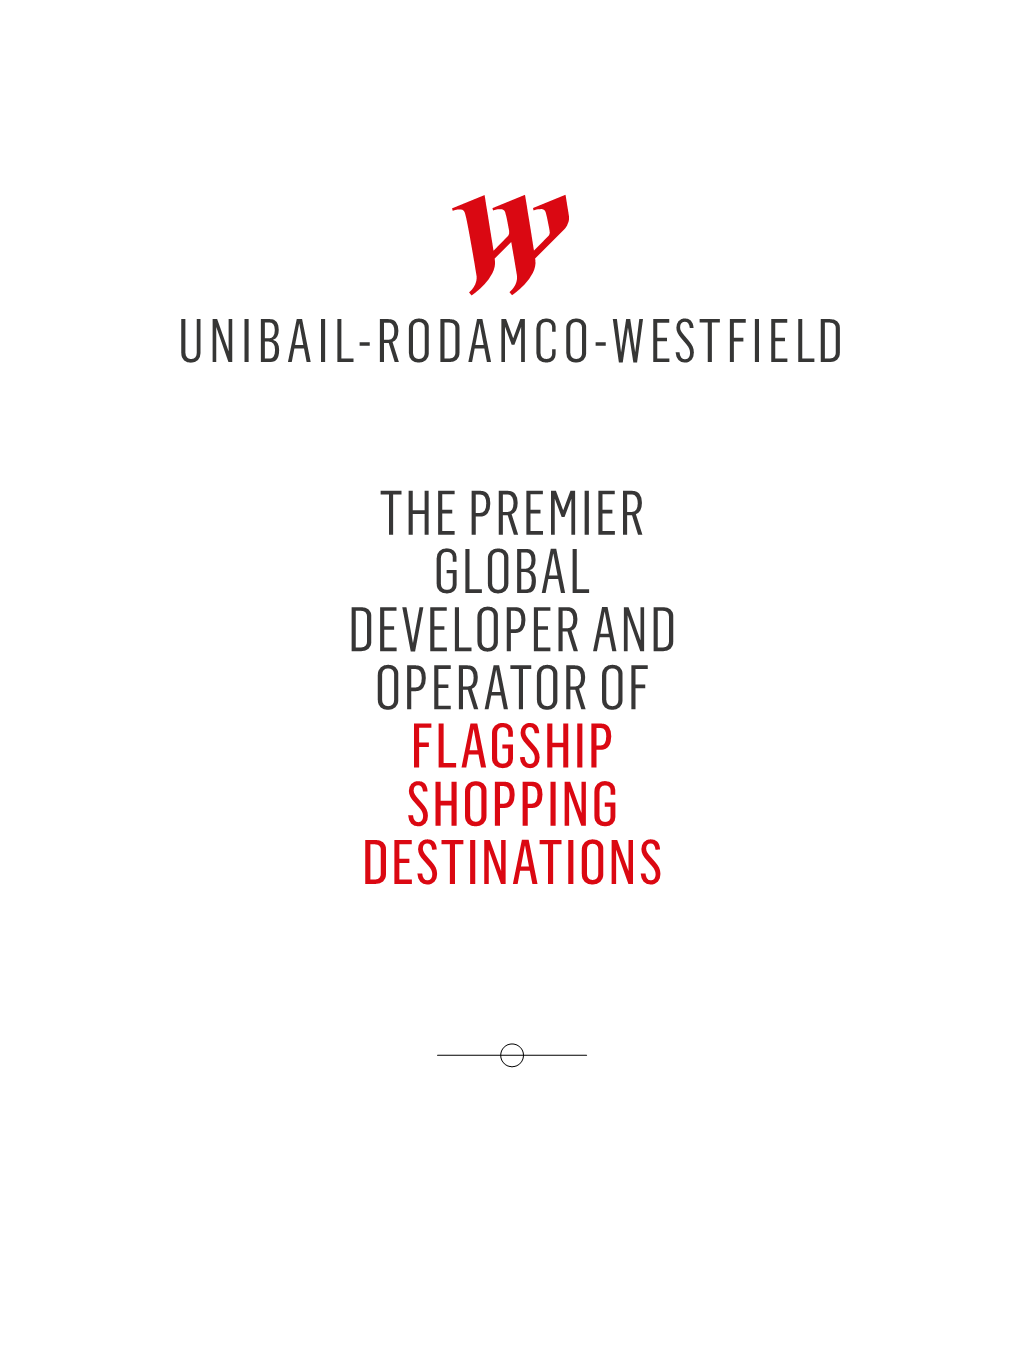 The Premier Global Developer and Operator of Flagship Shopping Destinations